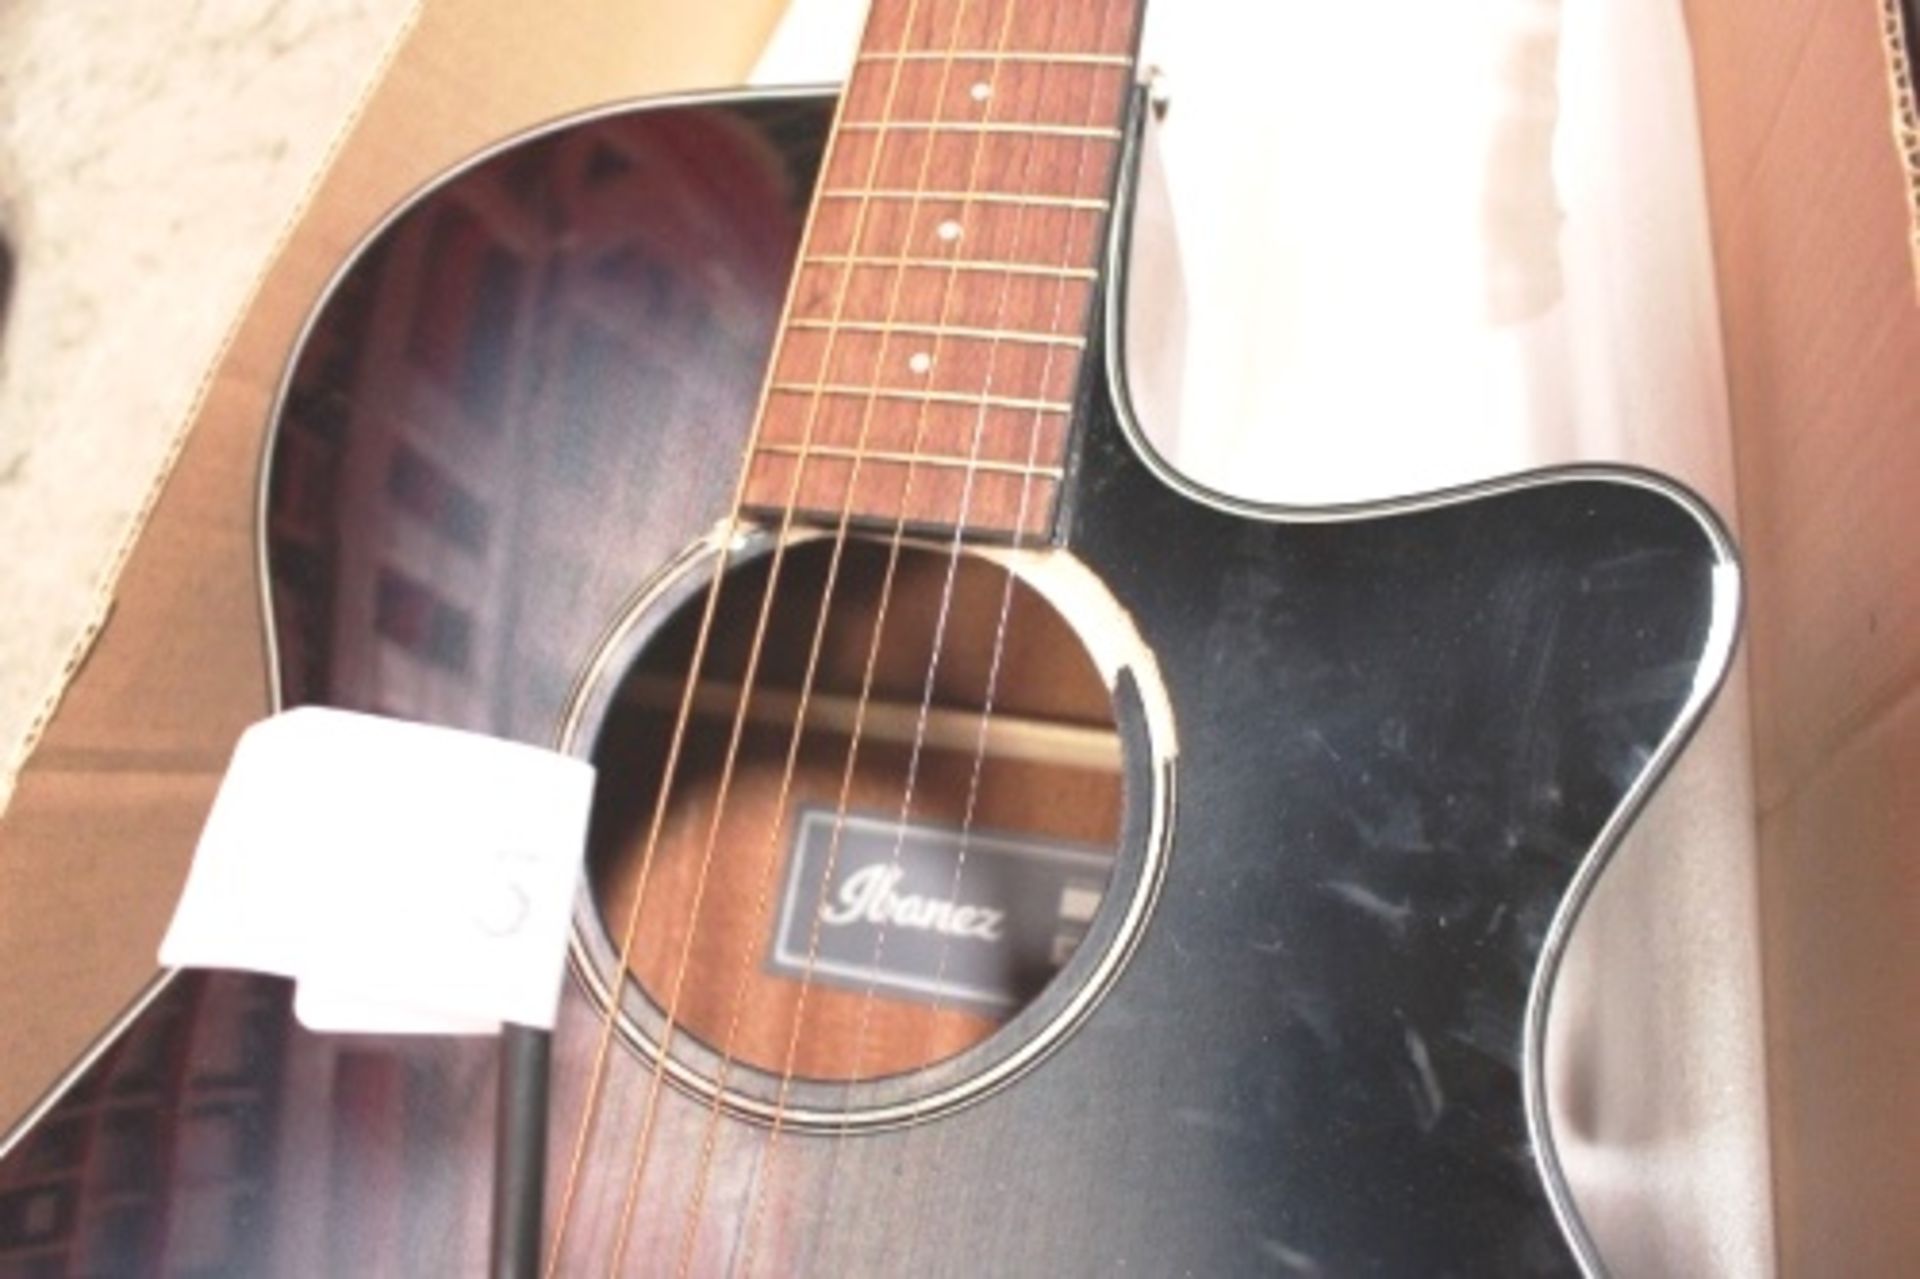 Ibanez AEG50-IBH acoustic guitar with broken neck - In box - Image 2 of 5